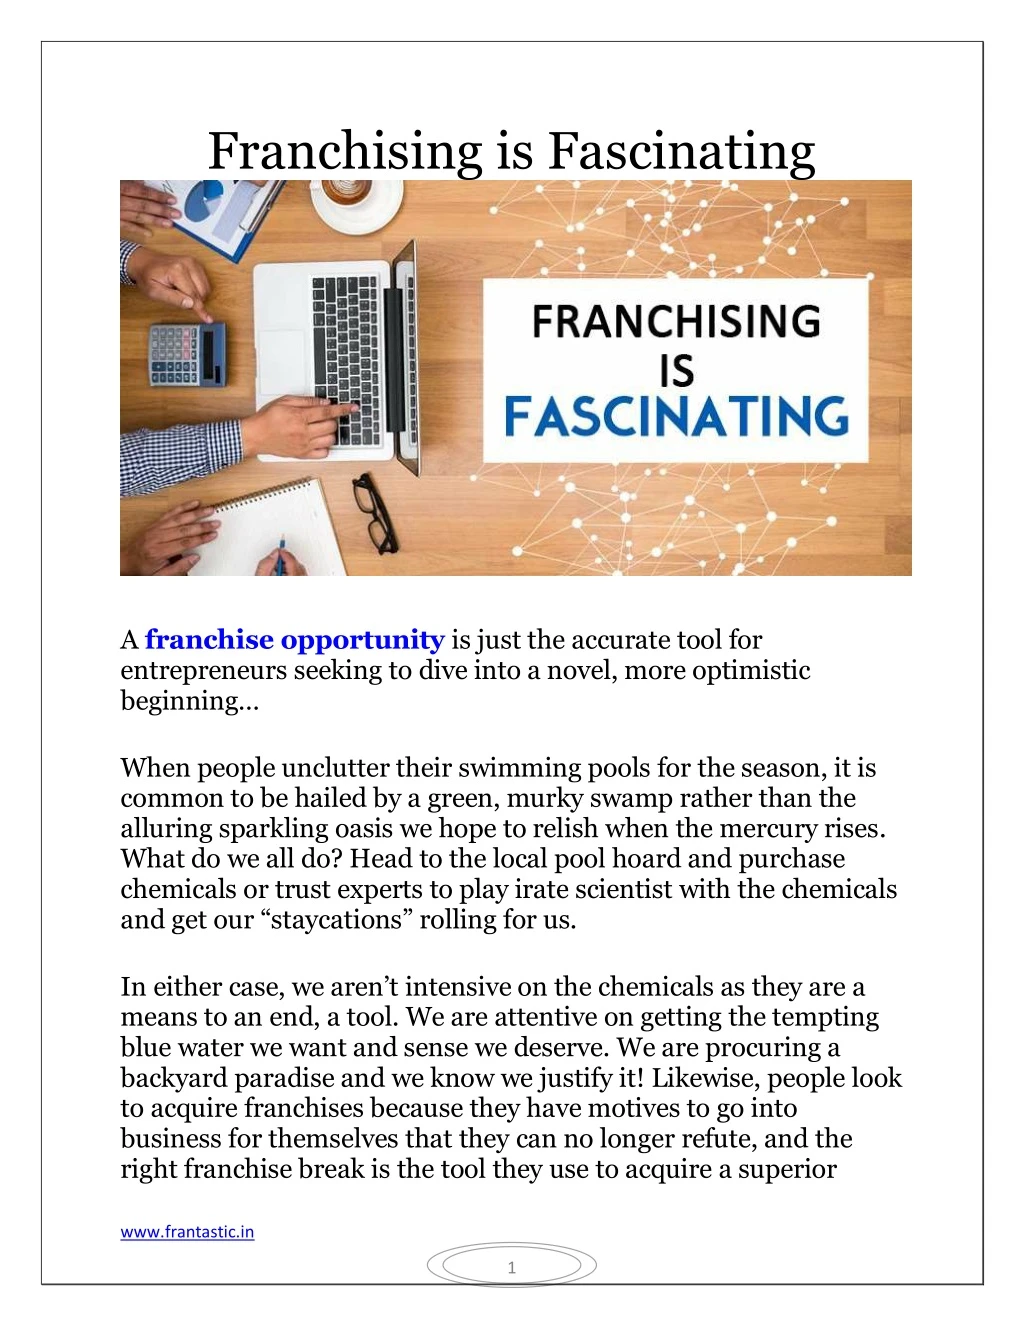 franchising is fascinating